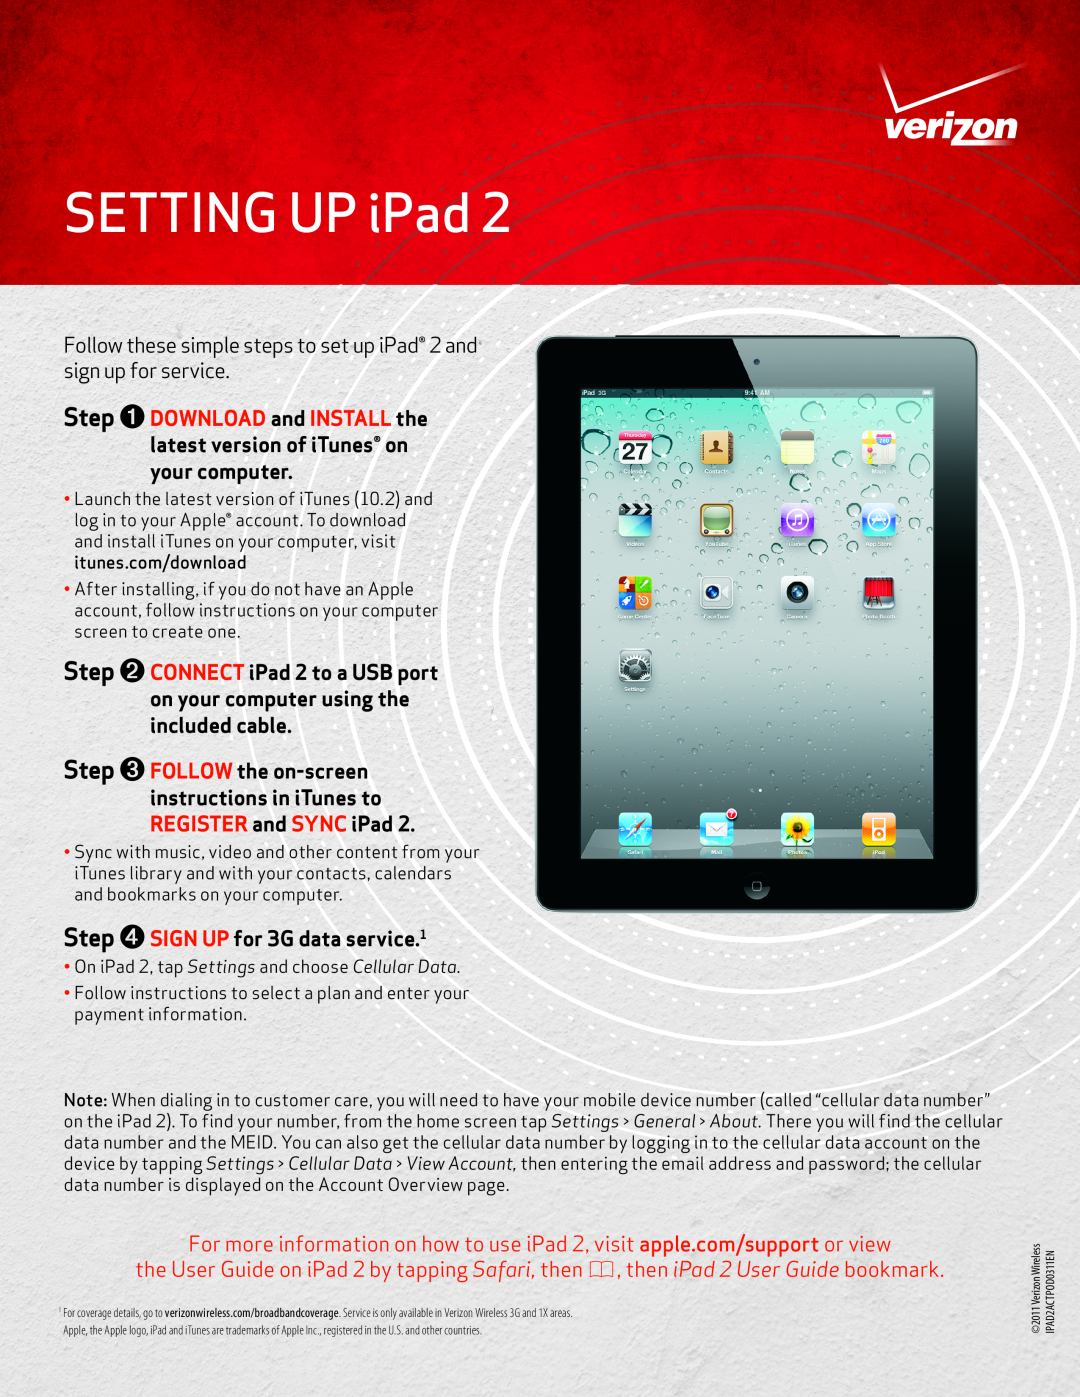 Apple iPad 2 manual SETTING UP iPad, Step ➍SIGN UP for 3G data service.1 